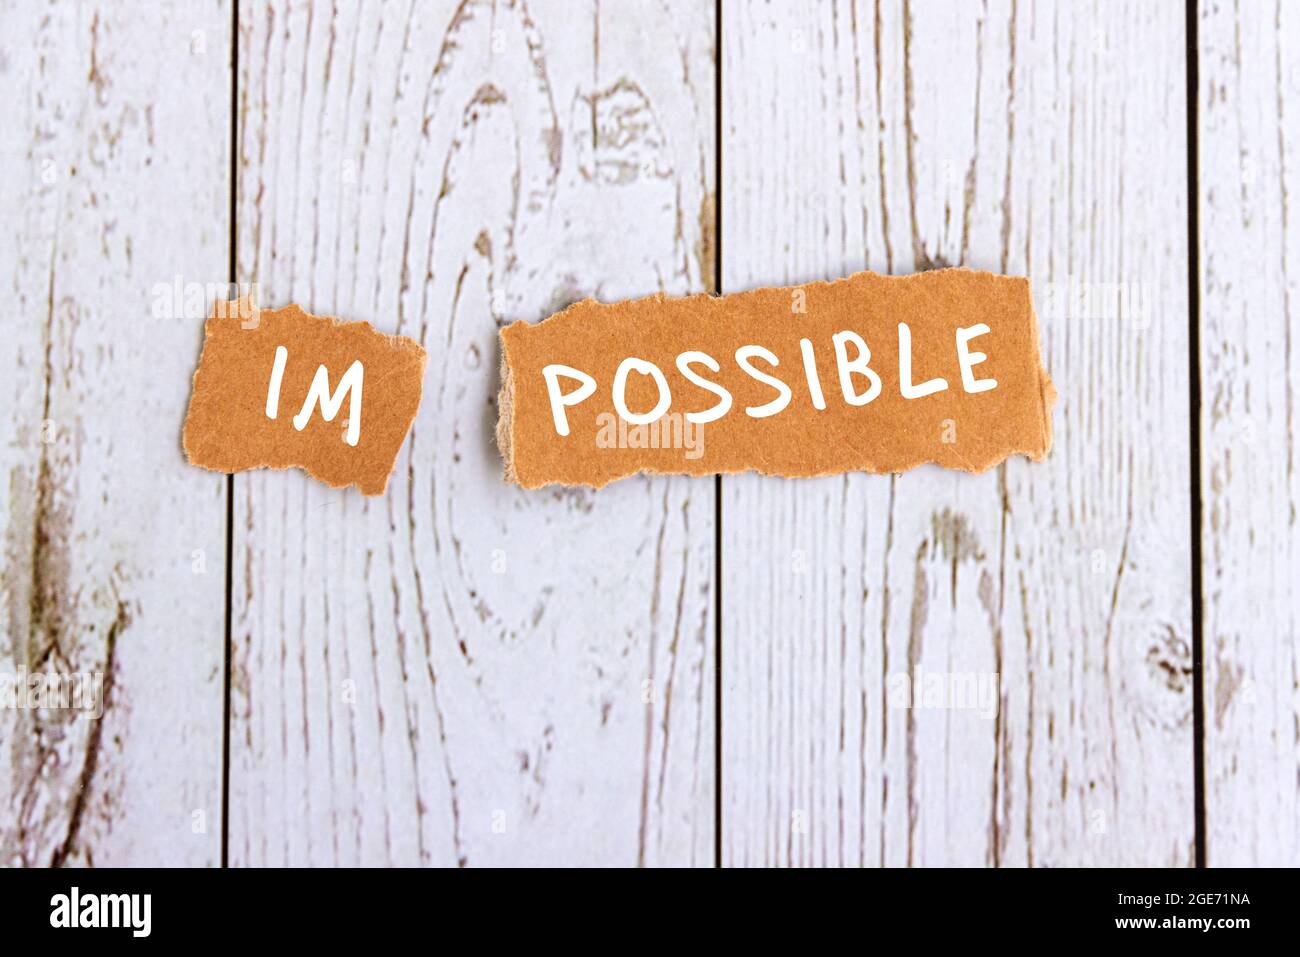 Impossible text on torn paper - conquering adversity concept Stock Photo